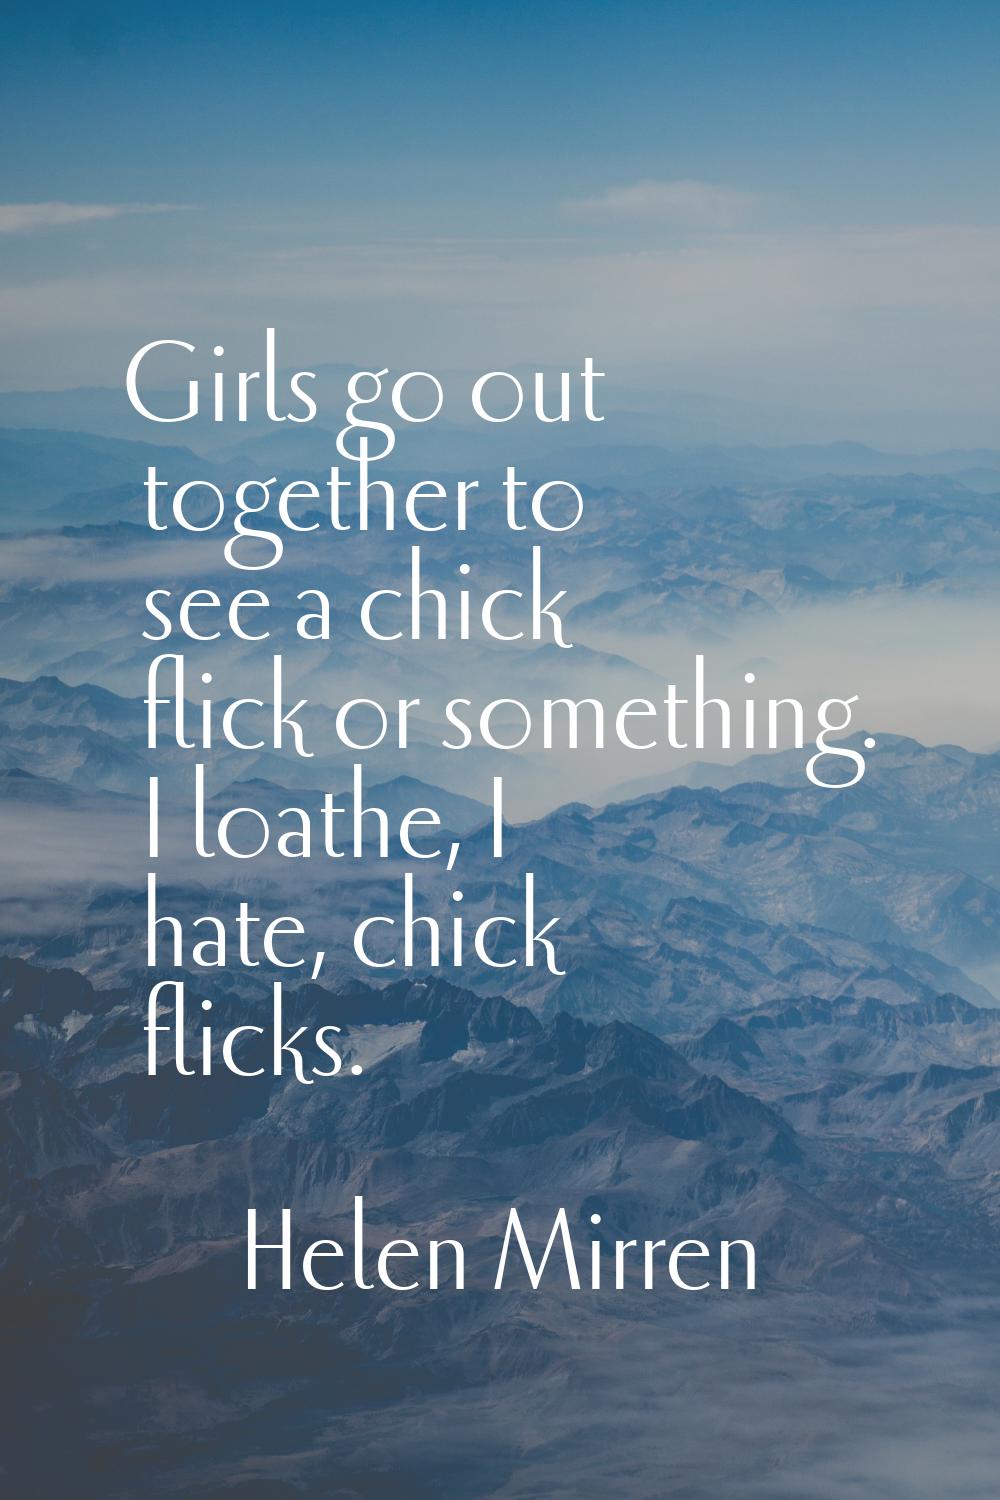 Girls go out together to see a chick flick or something. I loathe, I hate, chick flicks.